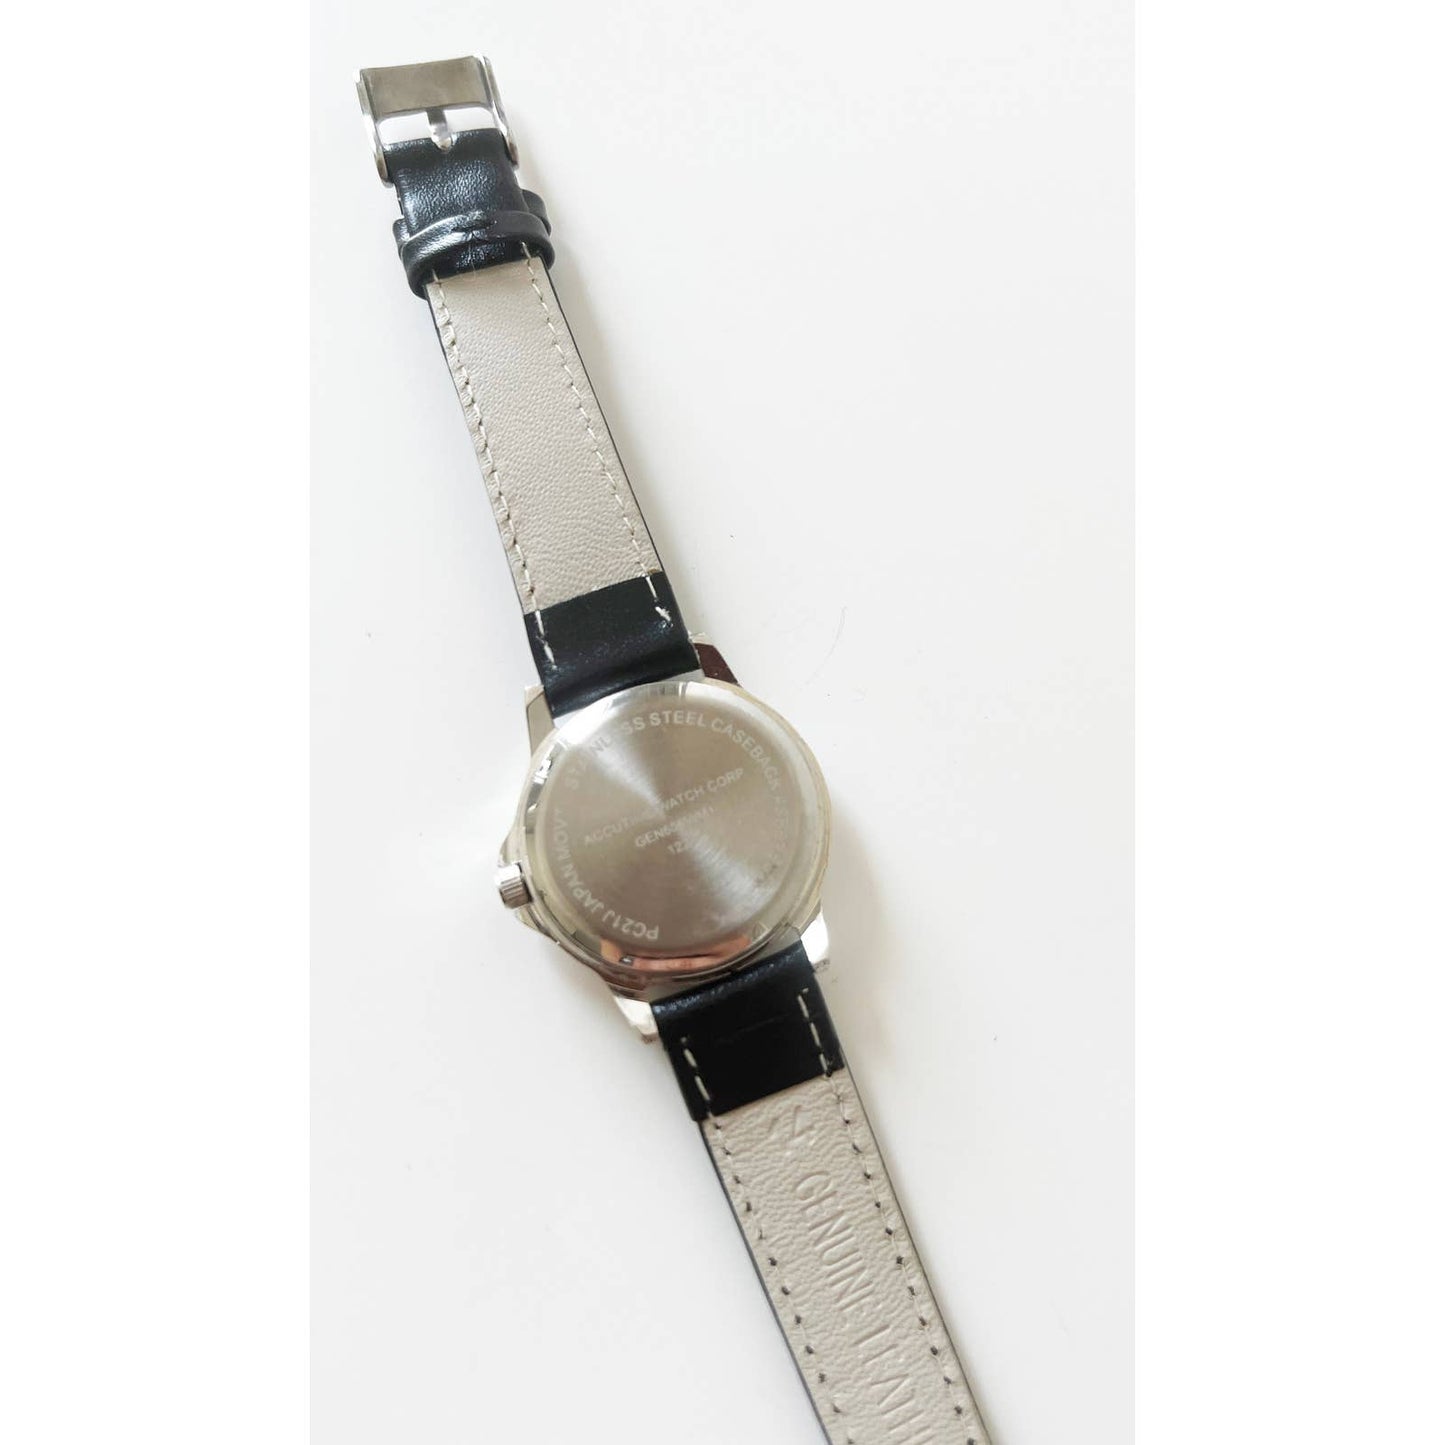 Vintage Leather Watch with Silver Details | New Band and Battery